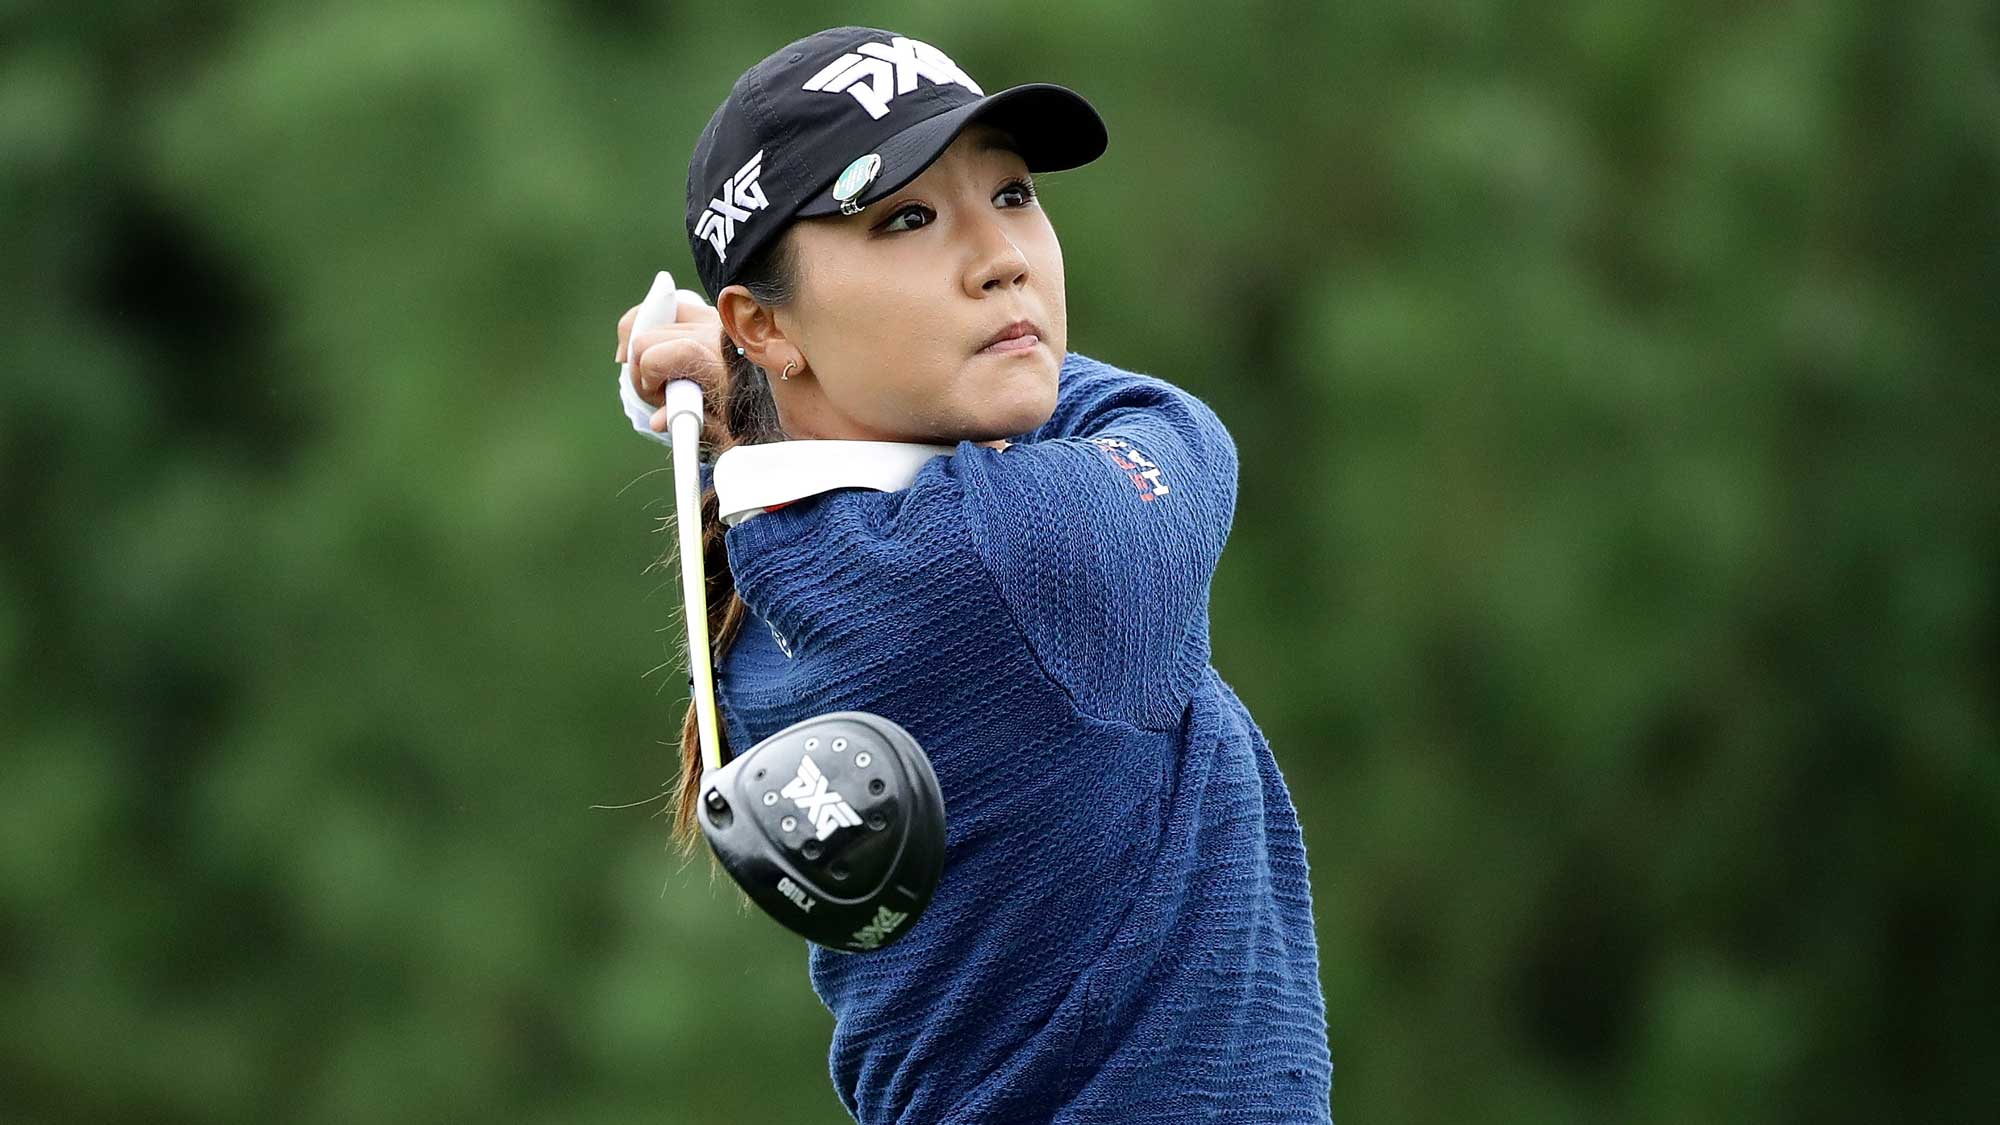 Lydia Ko of New Zealand plays a tee shot on the 2nd hole during the first round of the LPGA KEB Hana Bank Championship